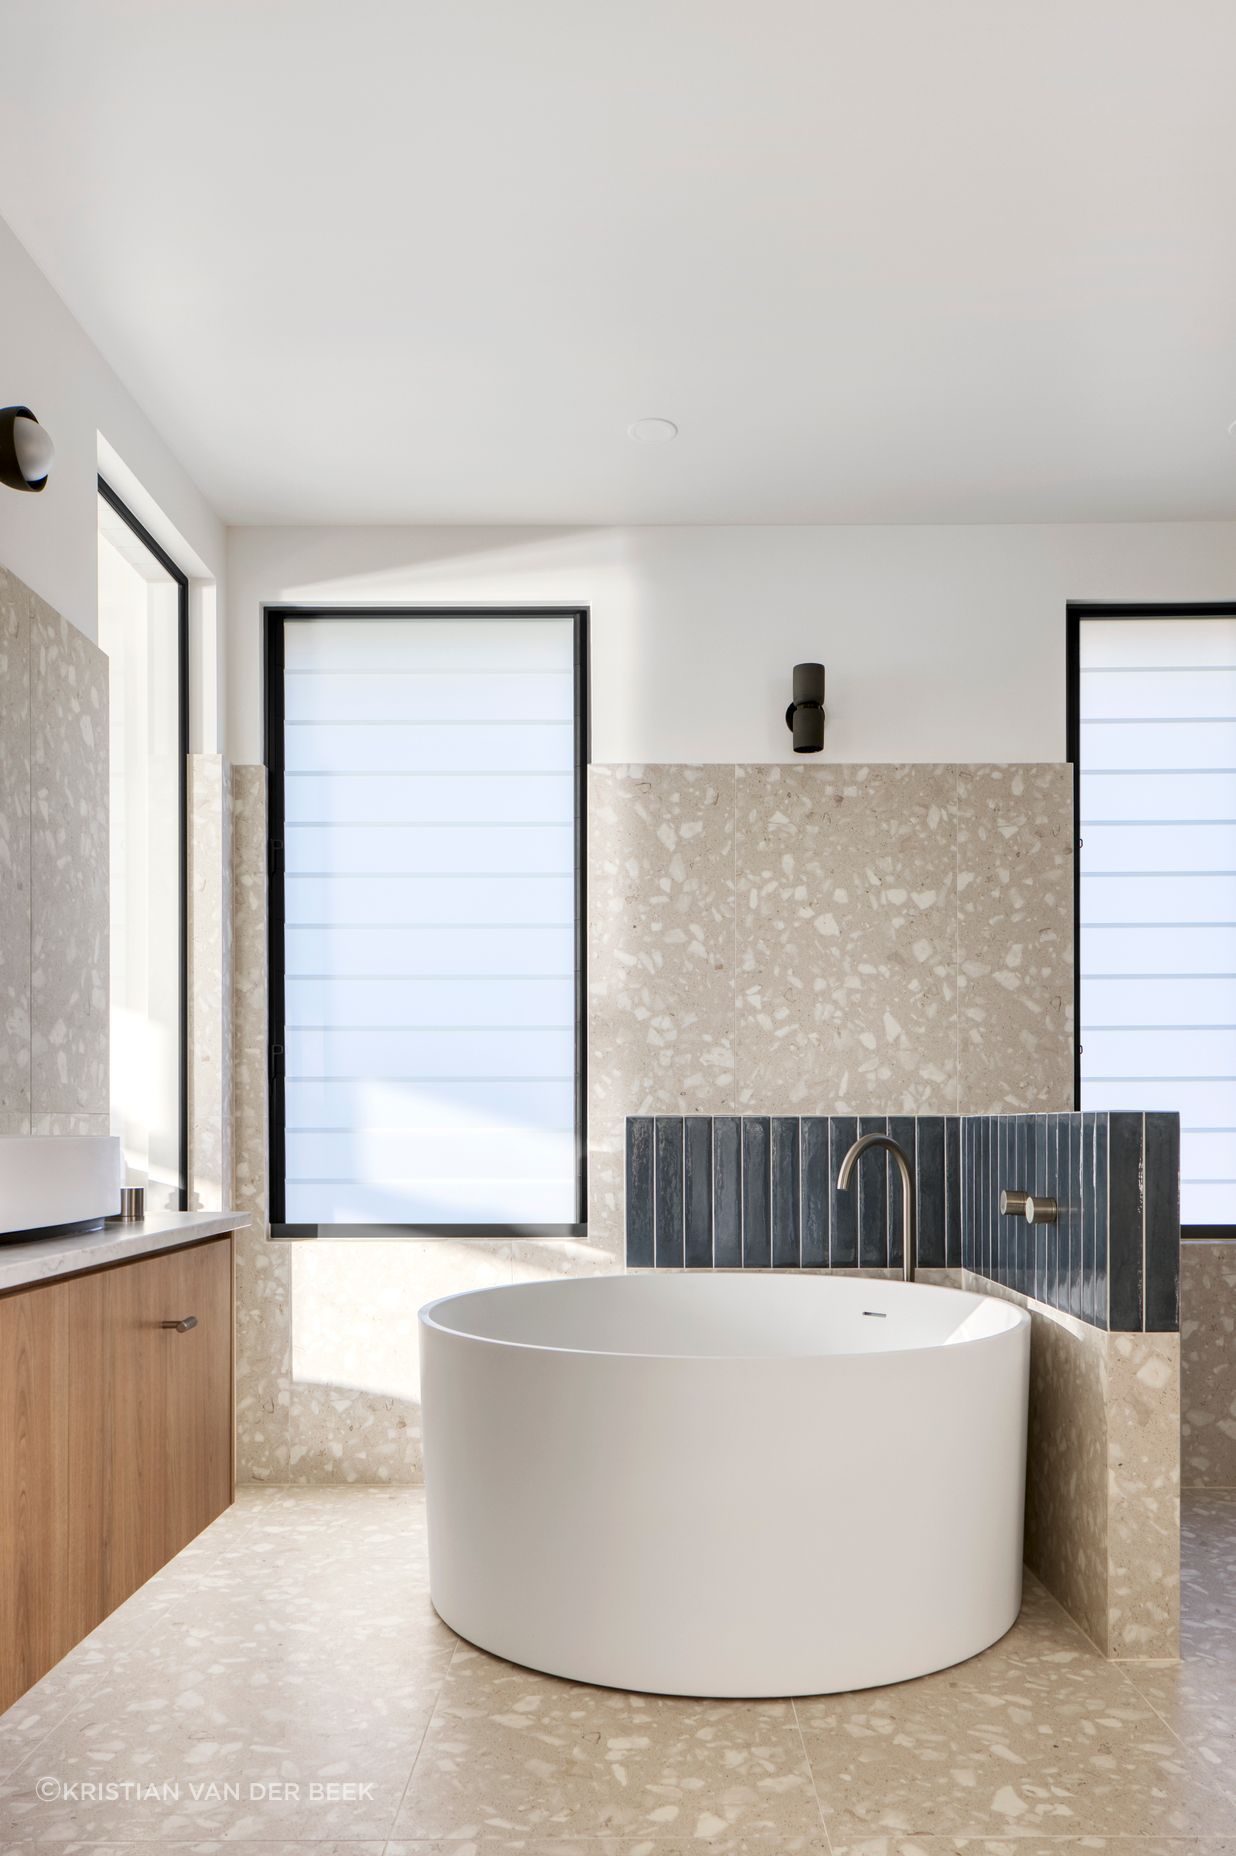 The Master ensuite with an elegant material mix